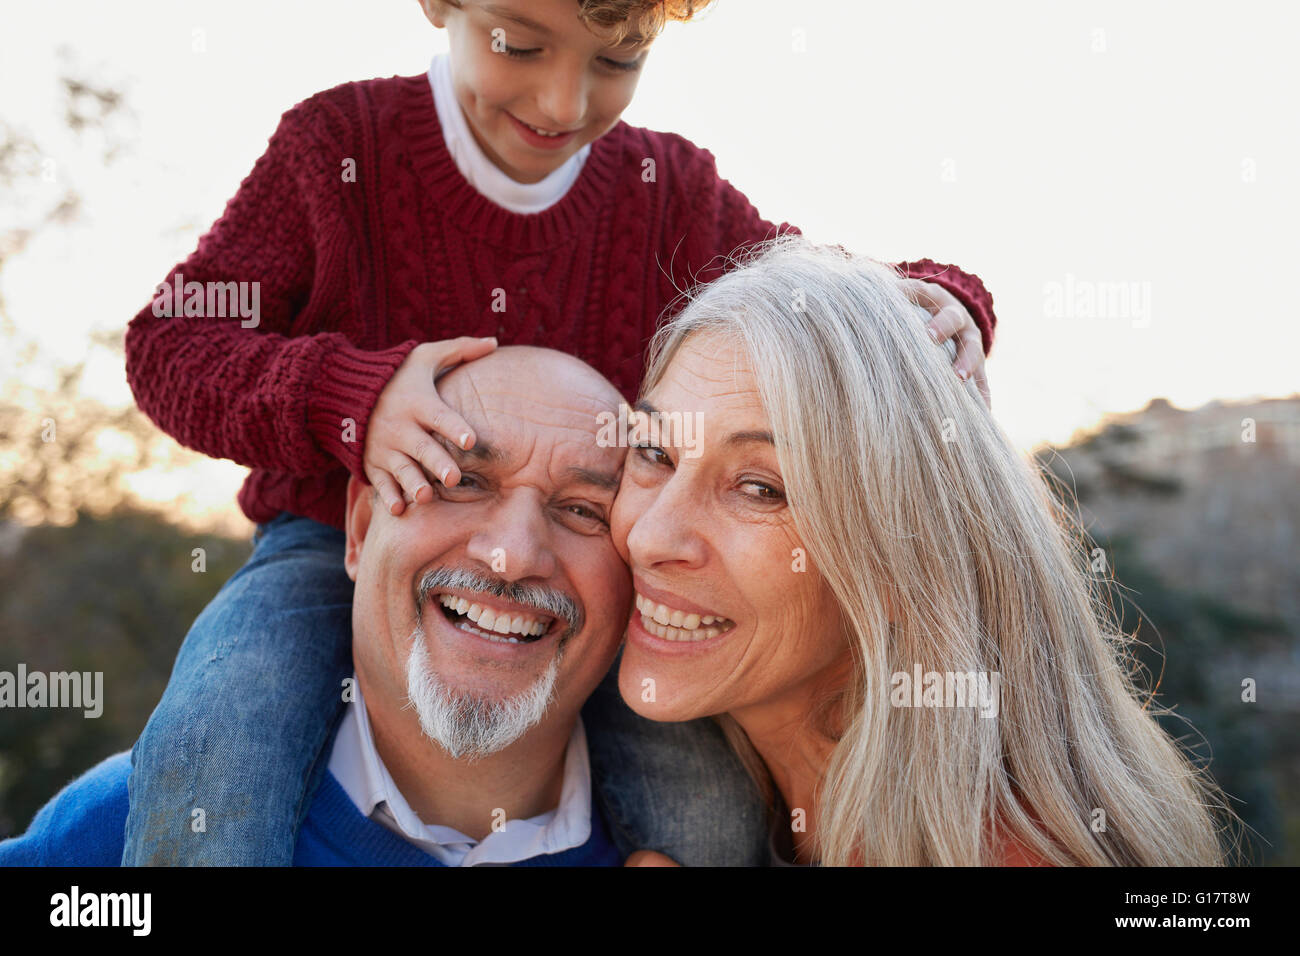 Grandparents with grandson on shoulders looking at camera smiling Stock Photo